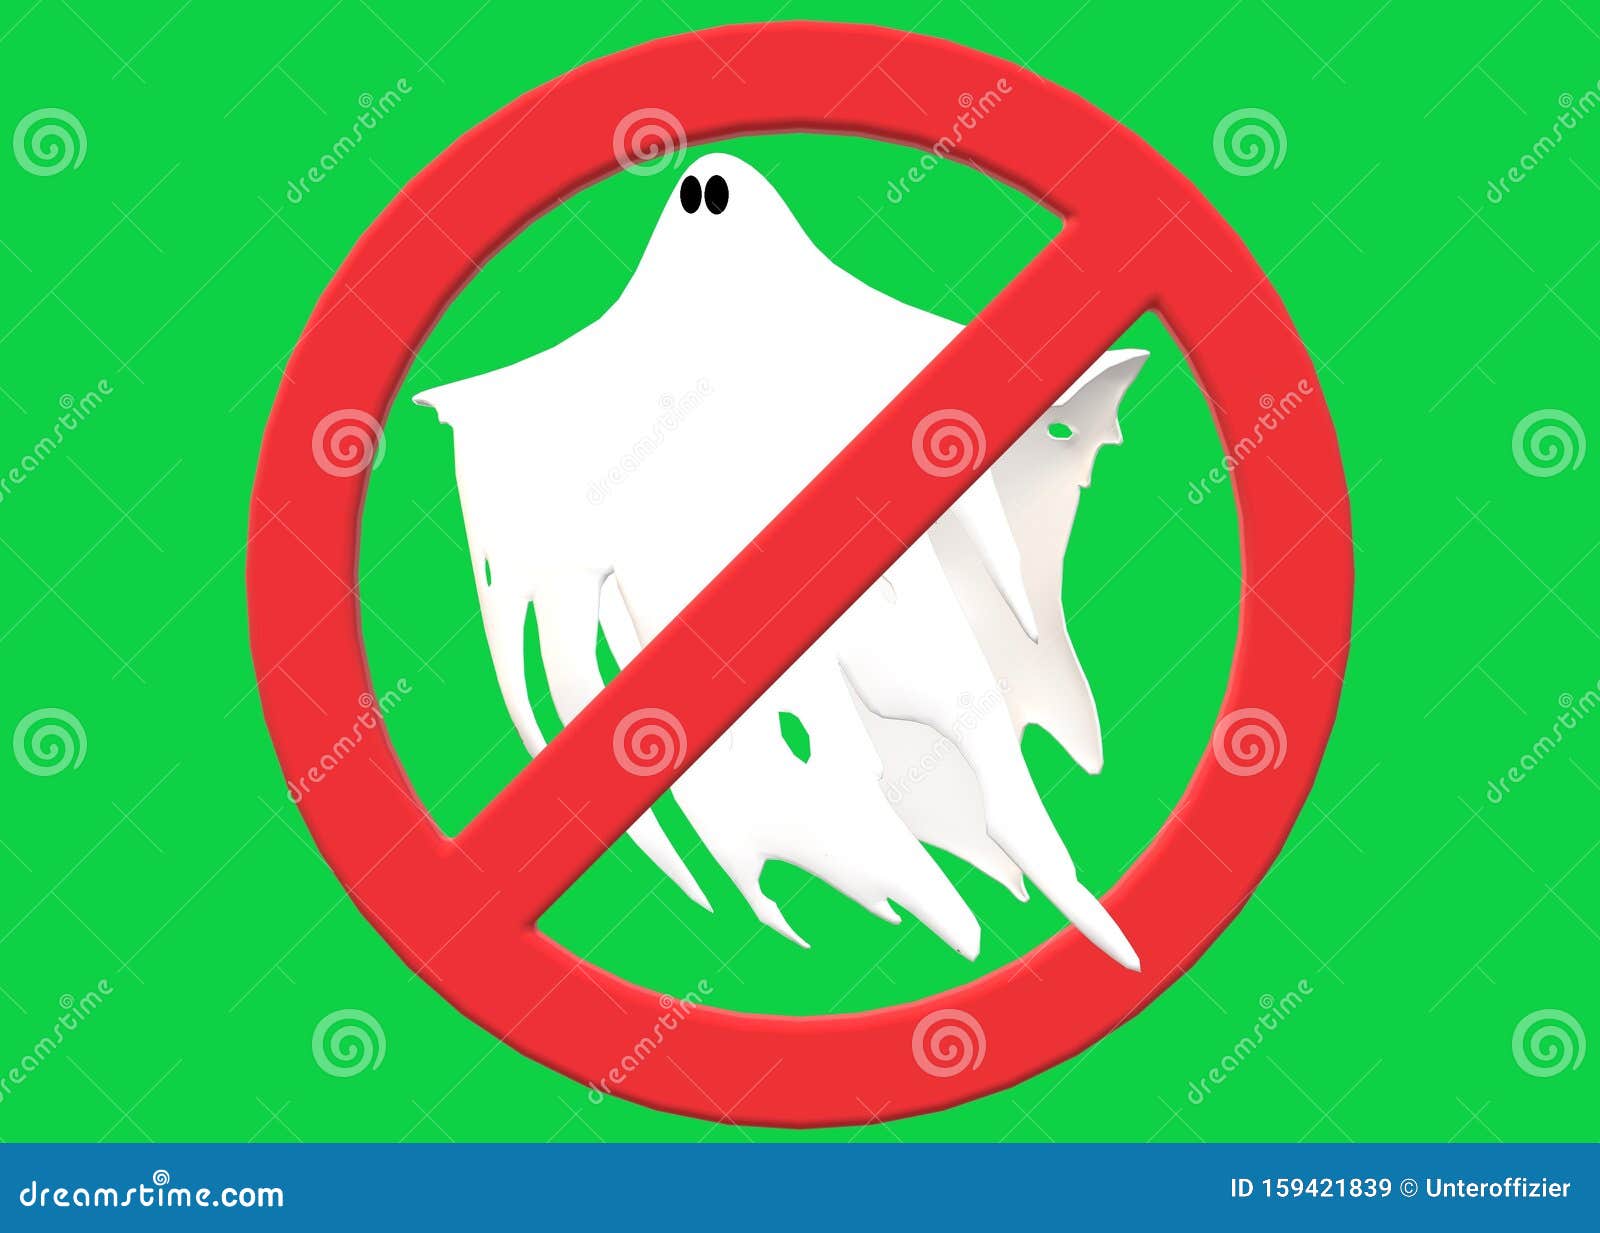 a red restricted sign over a white ghost apparition